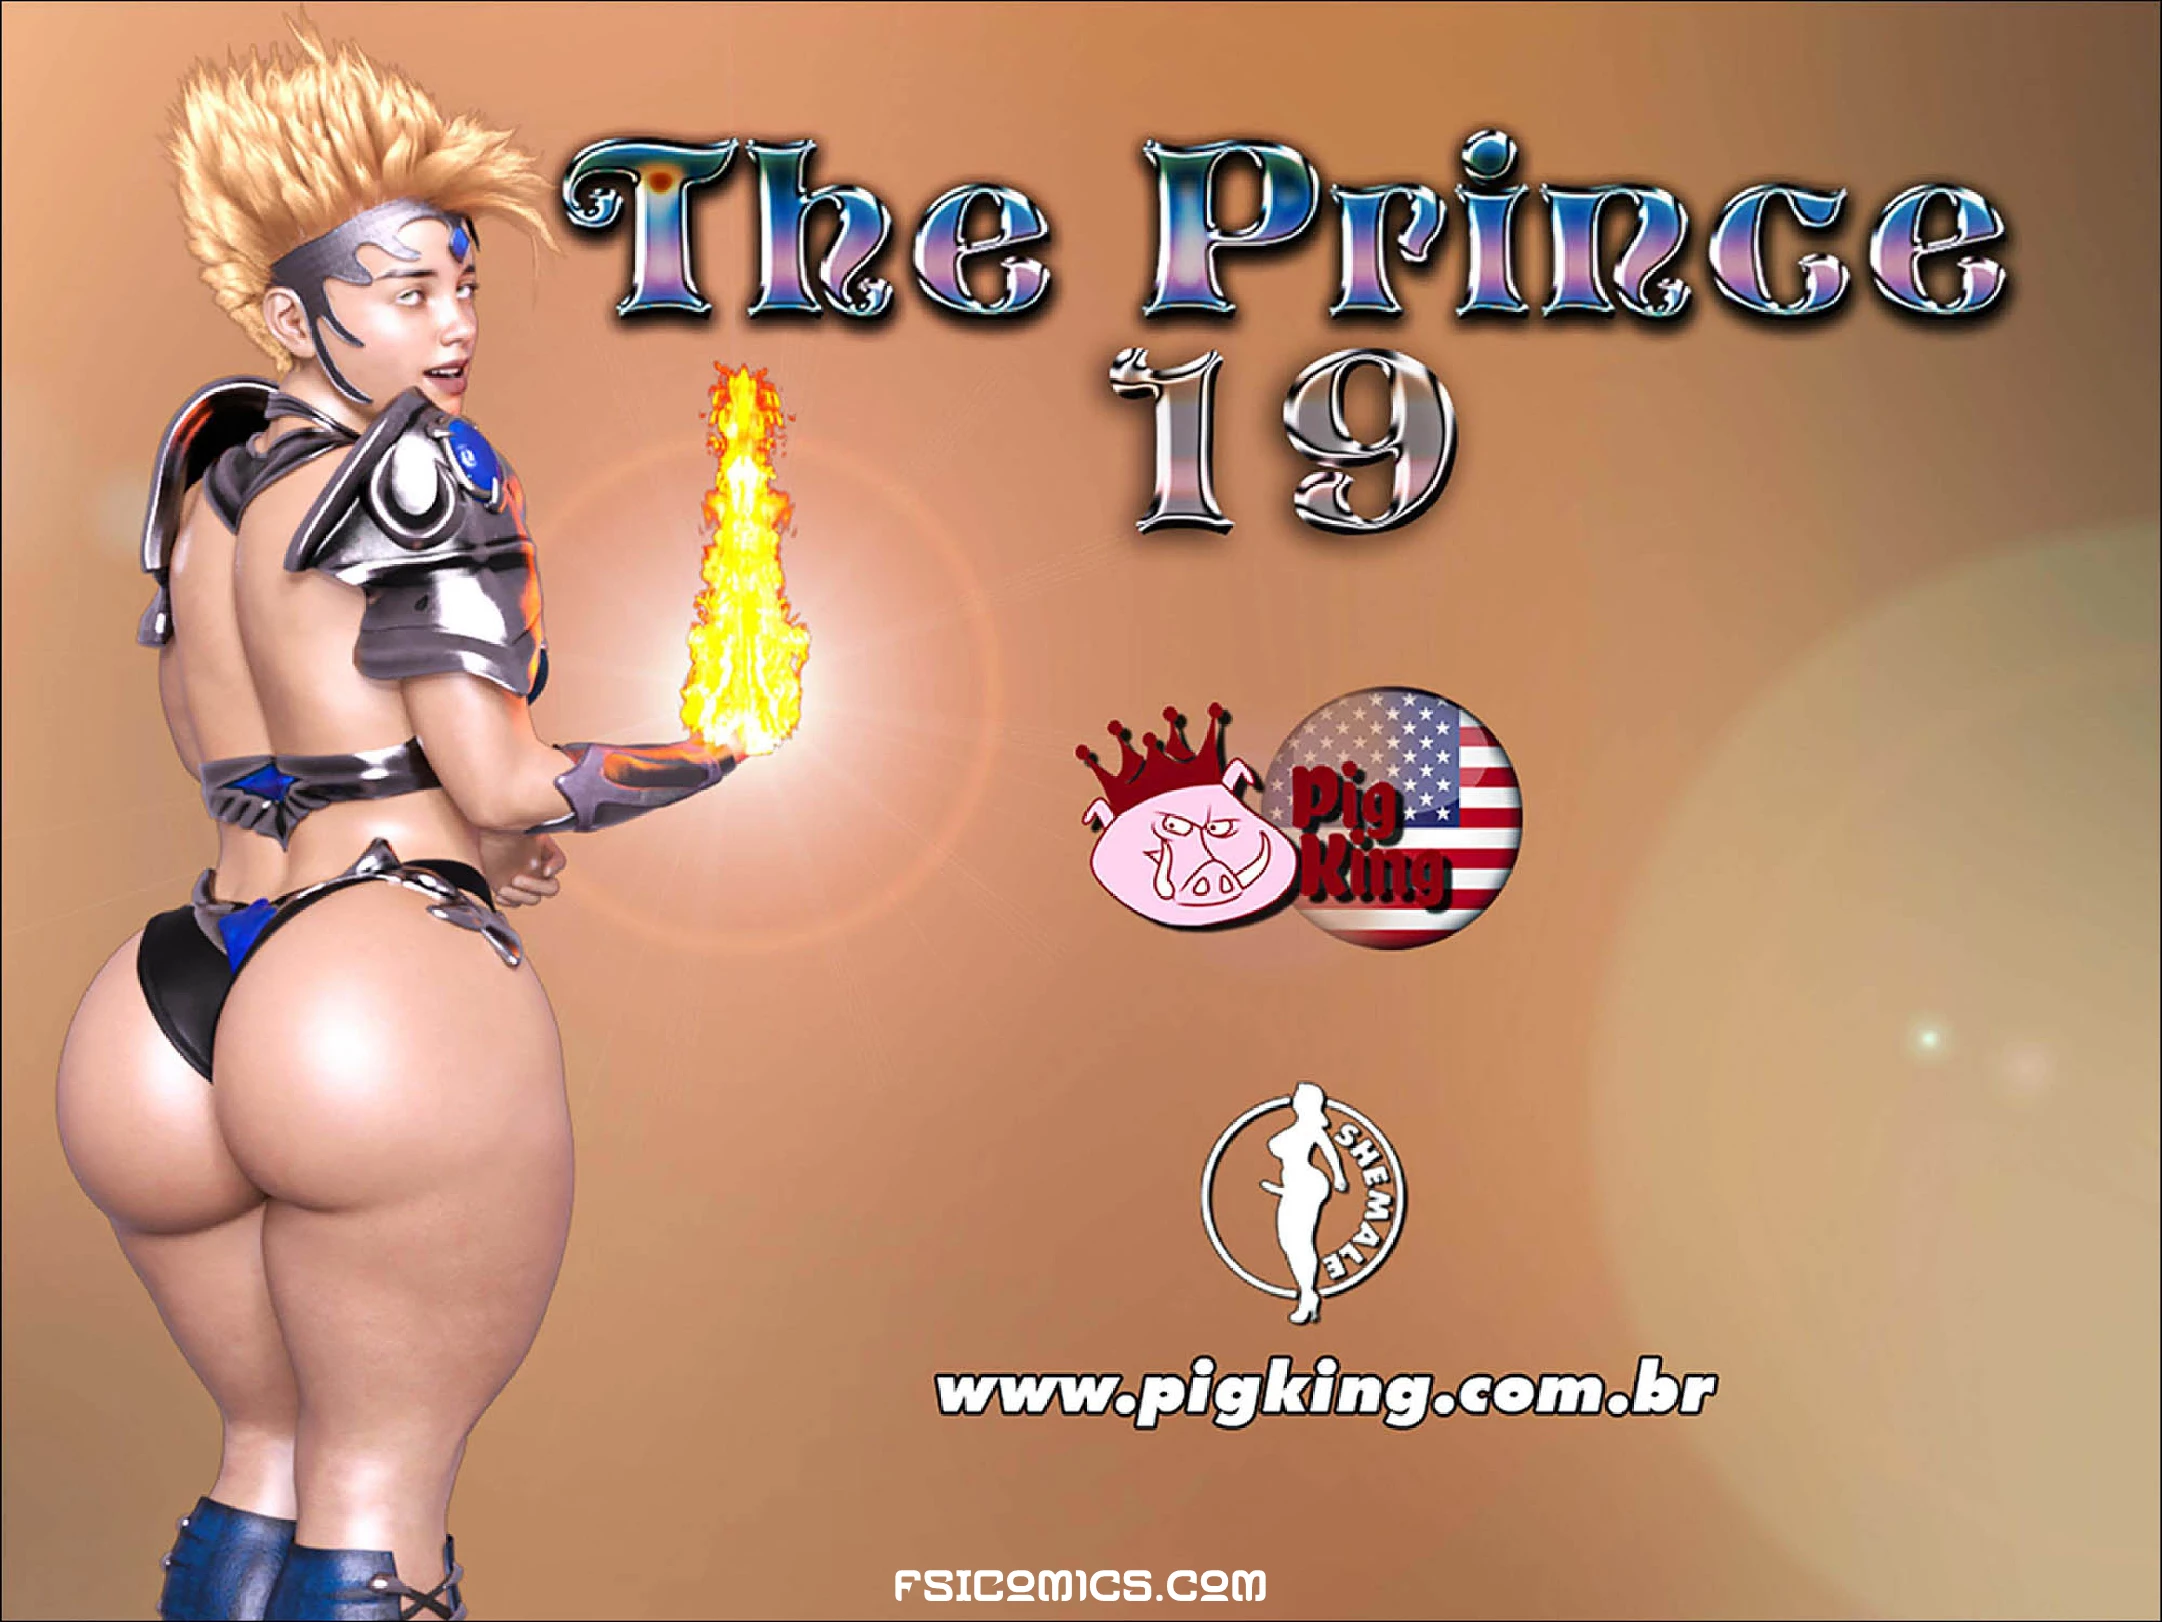 The Prince Chapter 19 – PigKing - 192 - FSIComics